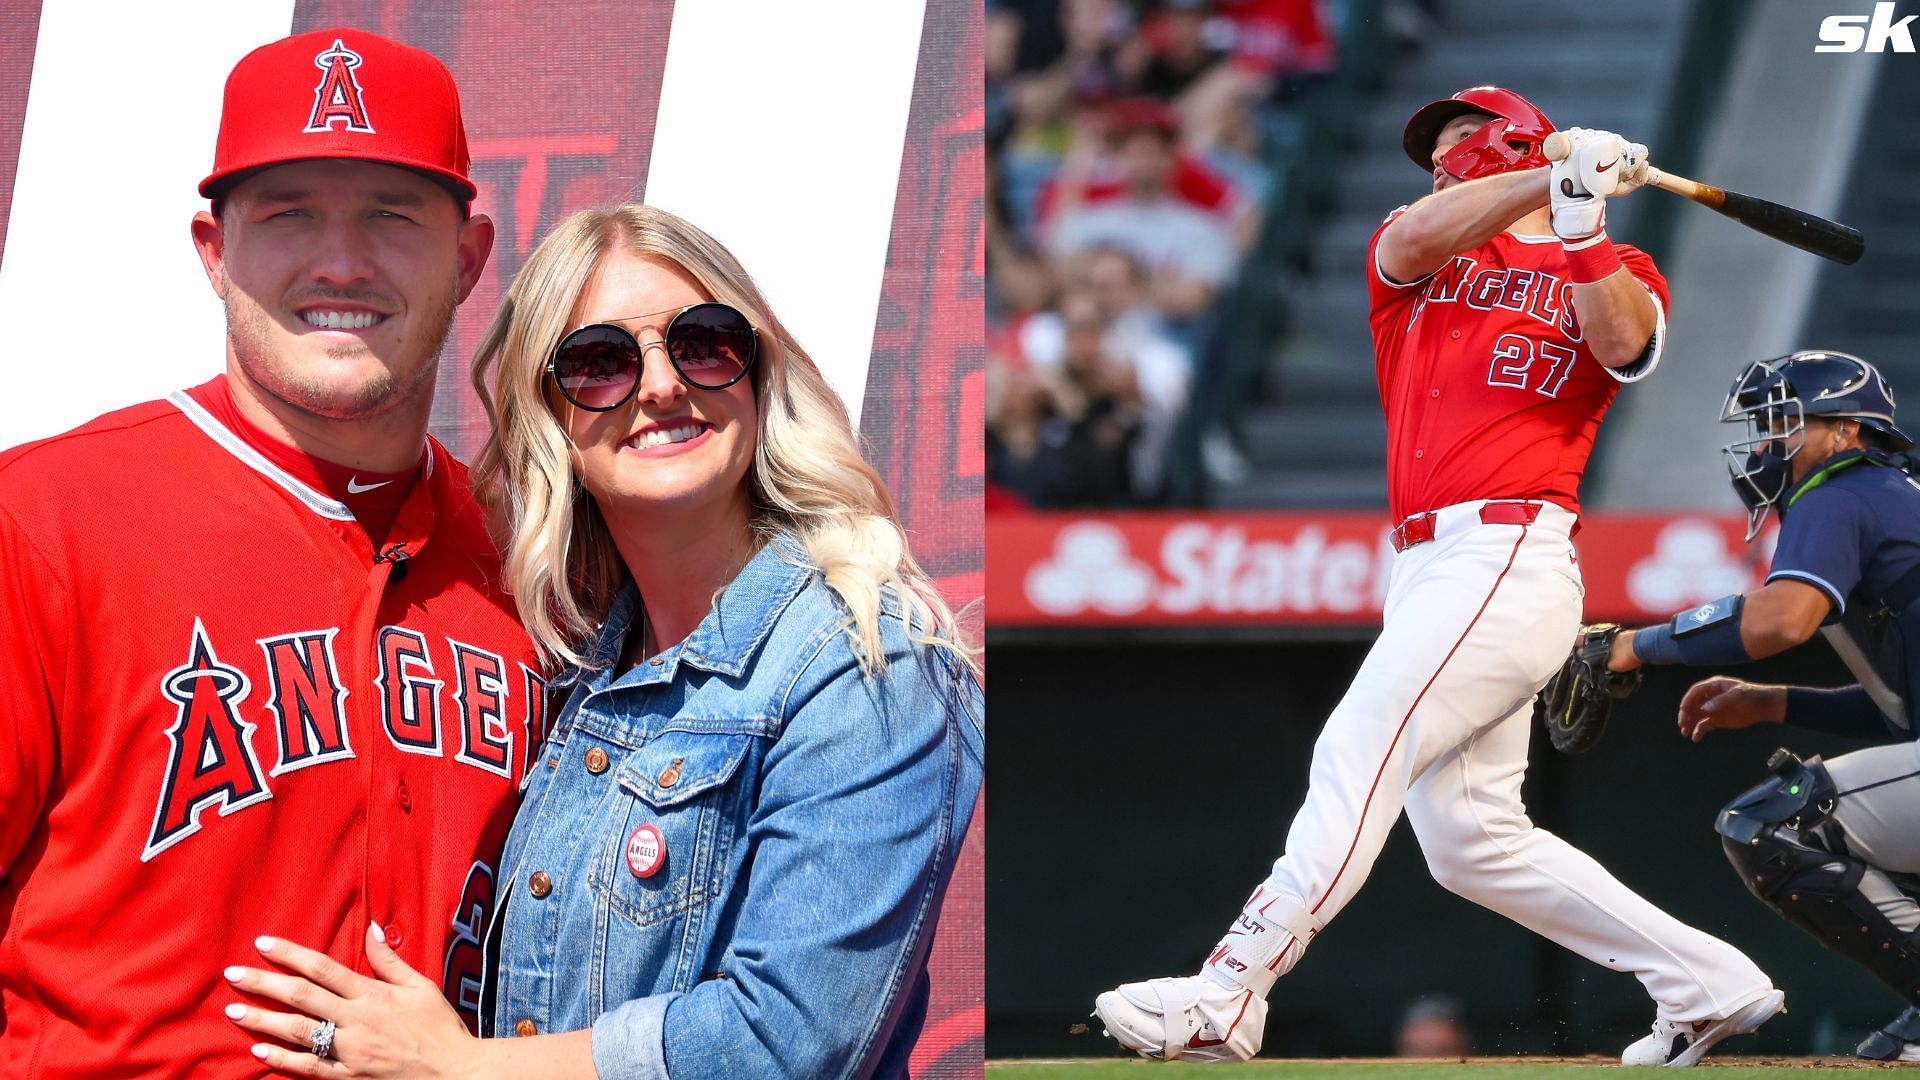 Mike Trout of the Los Angeles Angels of Anaheim poses for a photo with his wife Jessica after a press conference at Angel Stadium of Anaheim